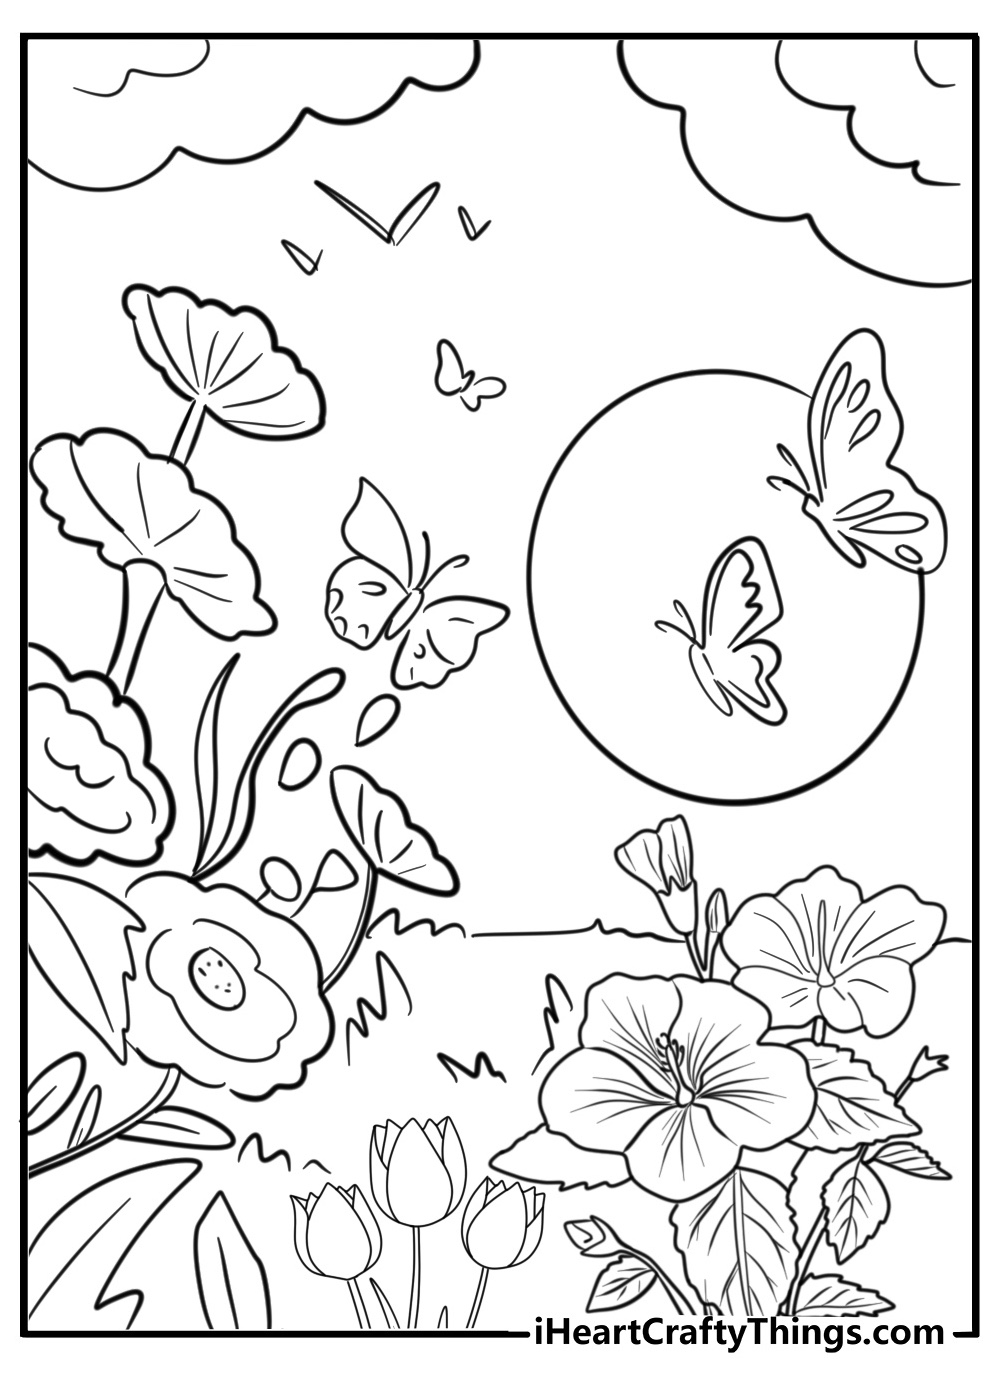 Whimsical coloring pages for adults